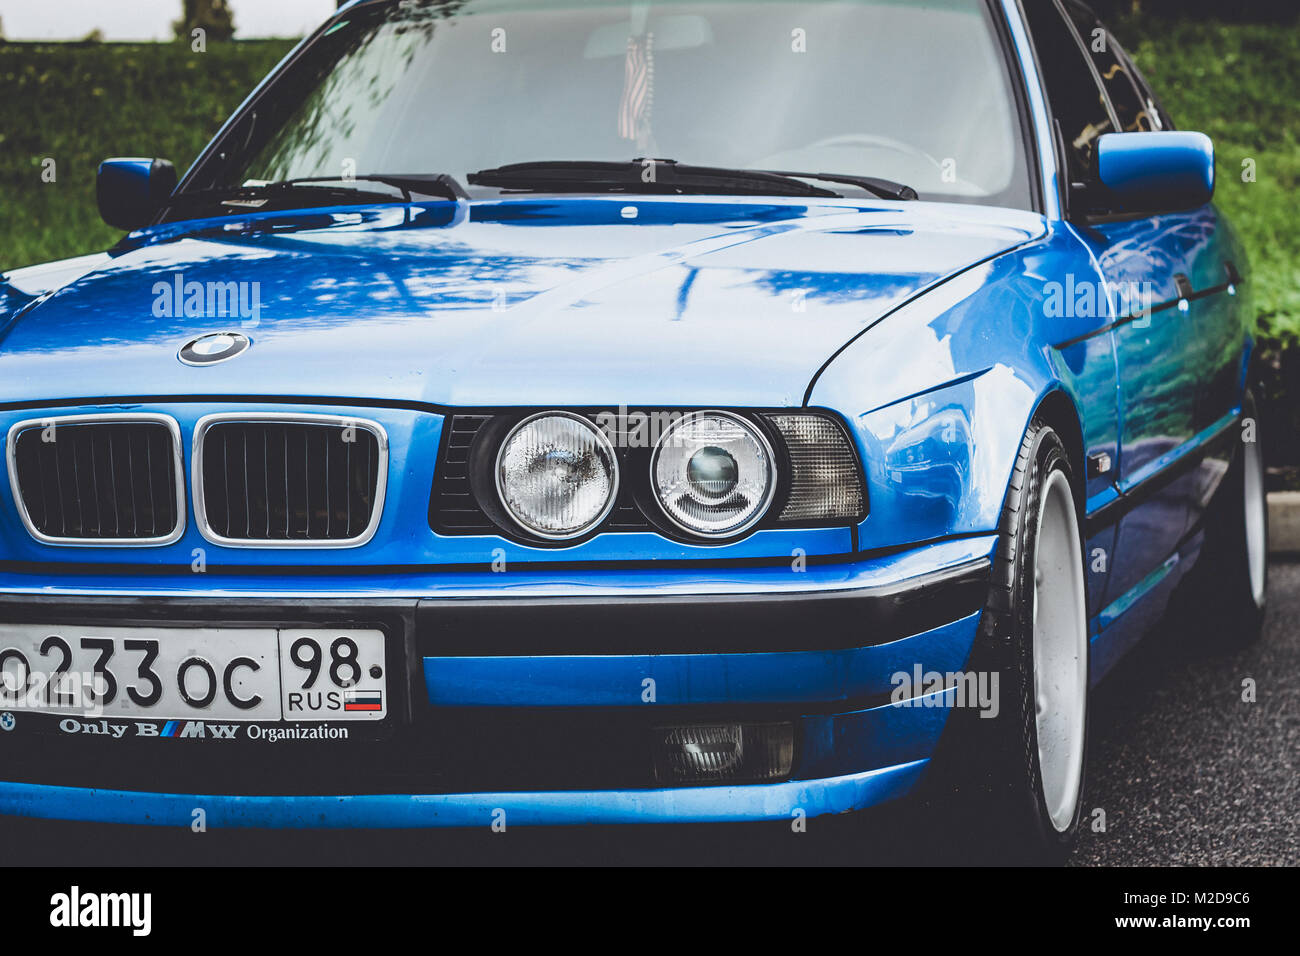 Saint-Petersburg, Russia - September 16, 2017: Blue retro car BMW 5-series 525, old model and release year. Road speed car of German Bavarian manufact Stock Photo